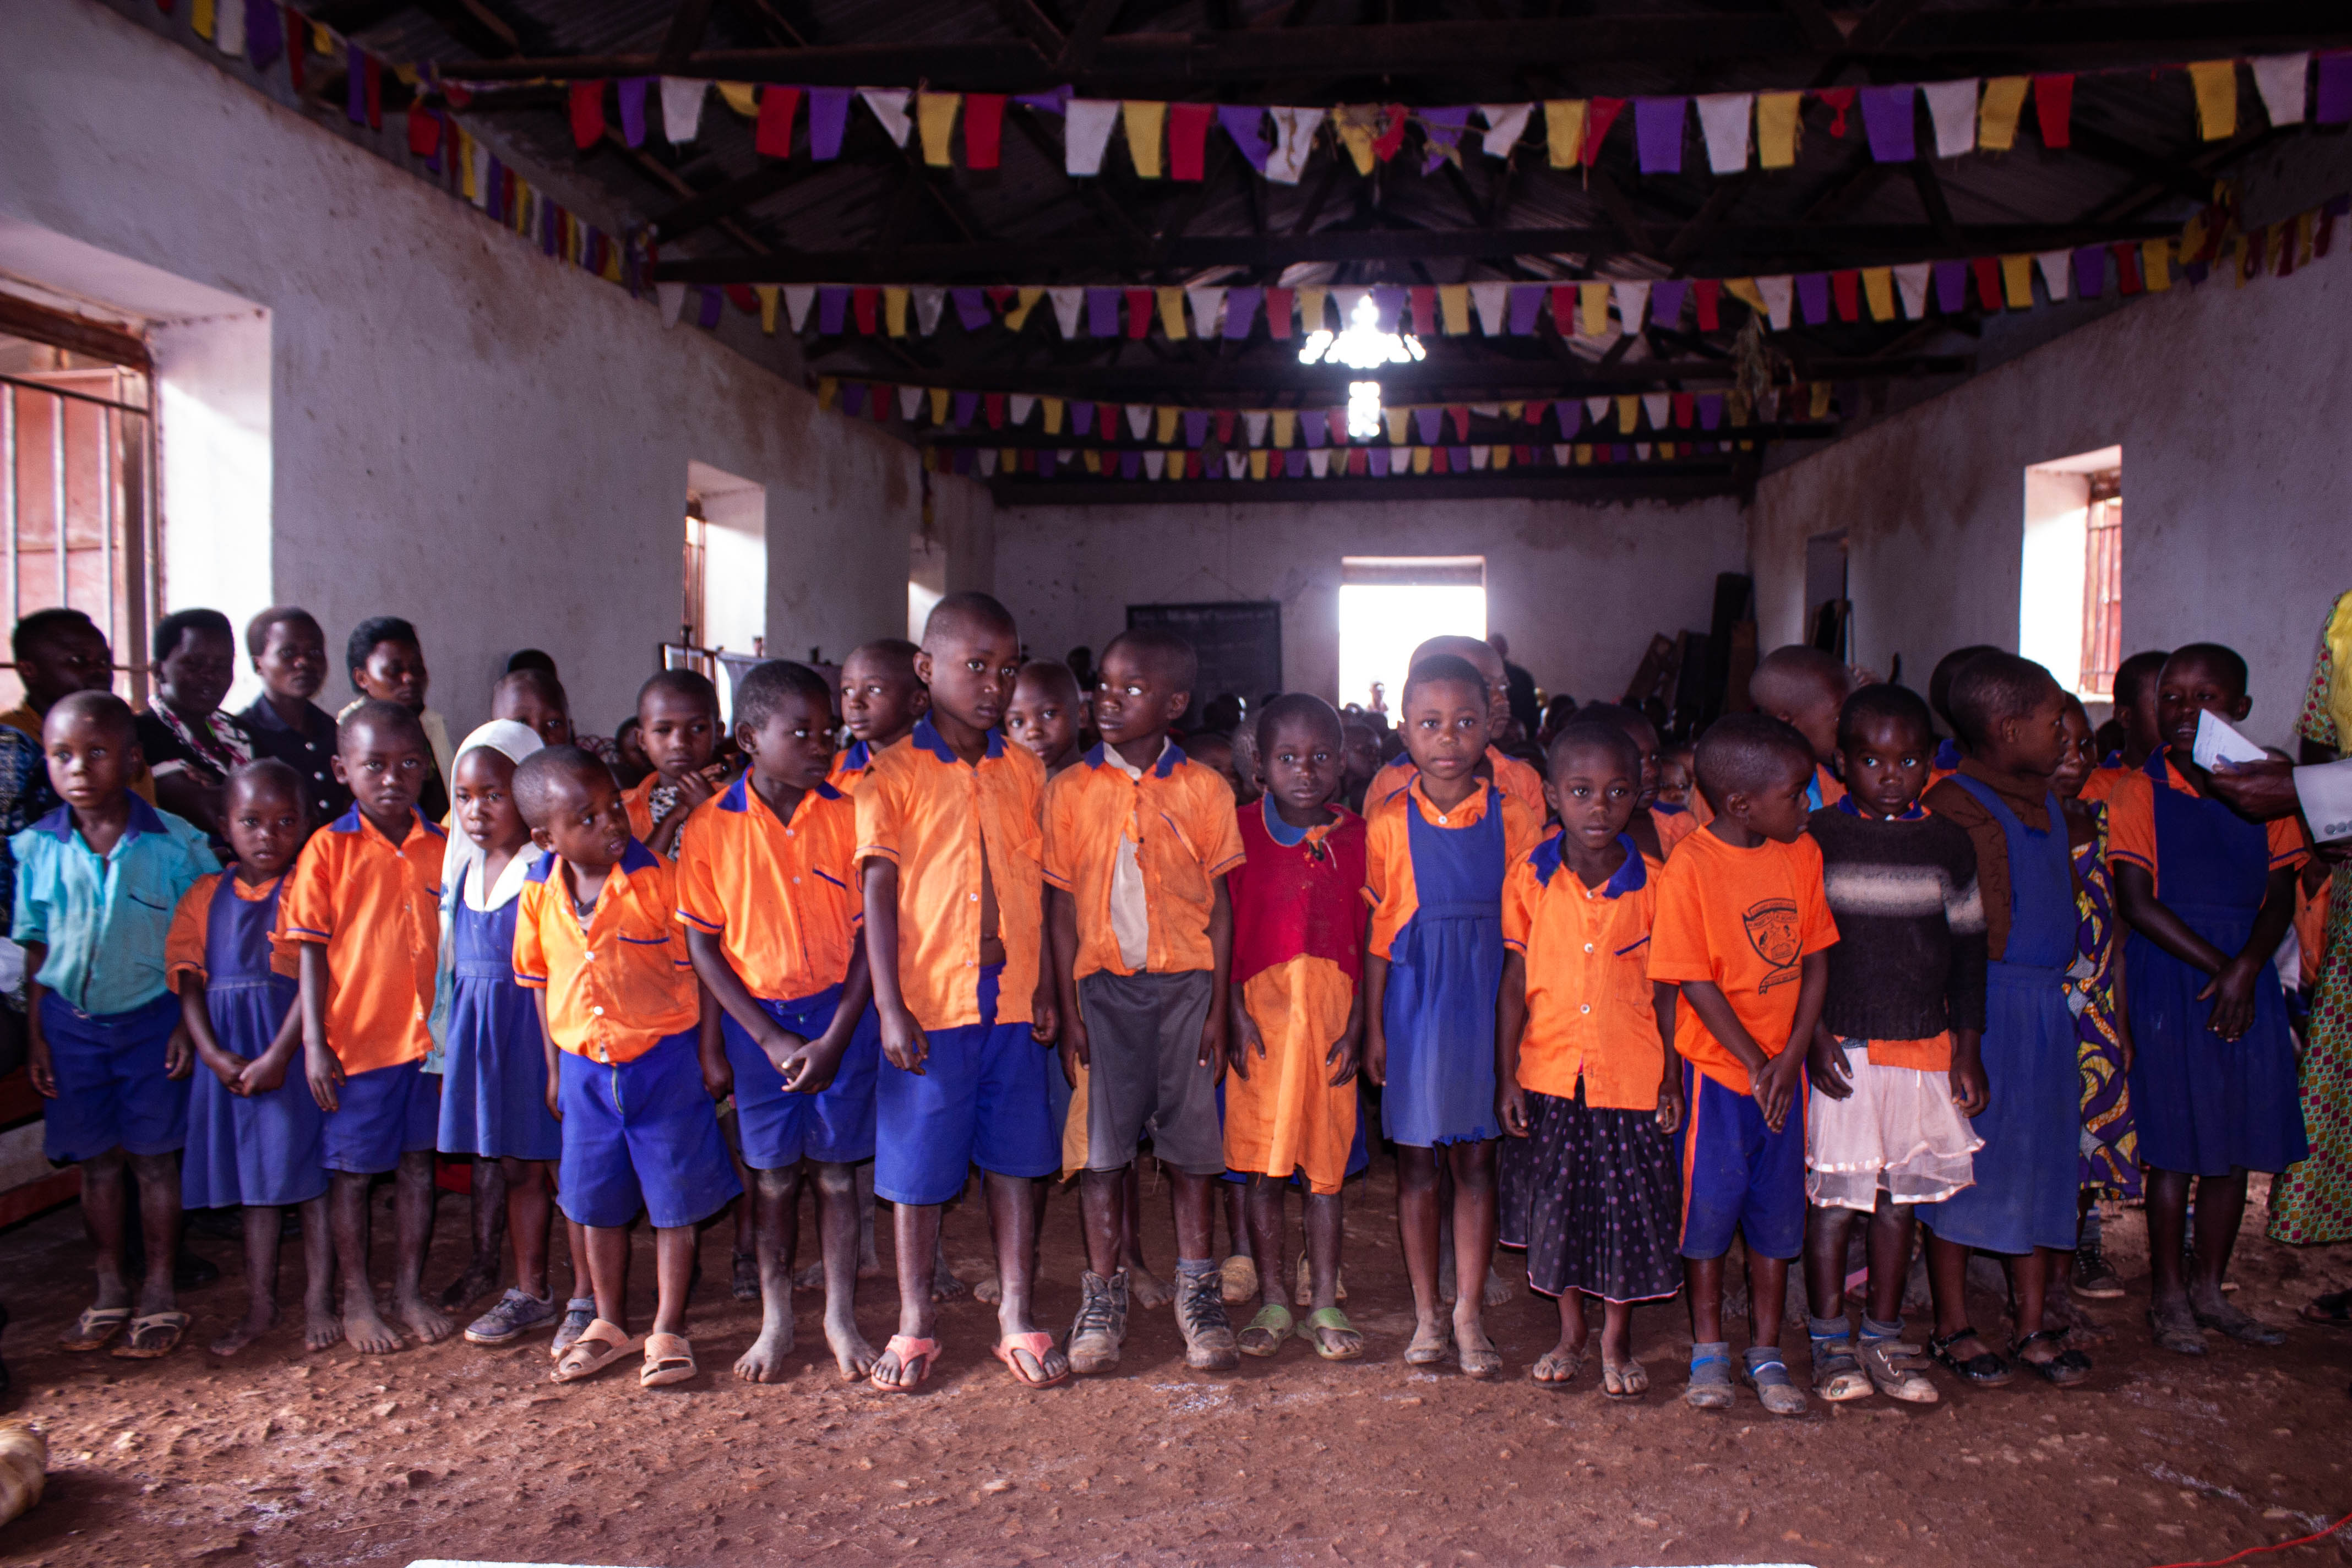 At Matere Model School, the children welcome the team with songs and dance. Here the children and gathered in a line ready to begin the welcoming ceremony.